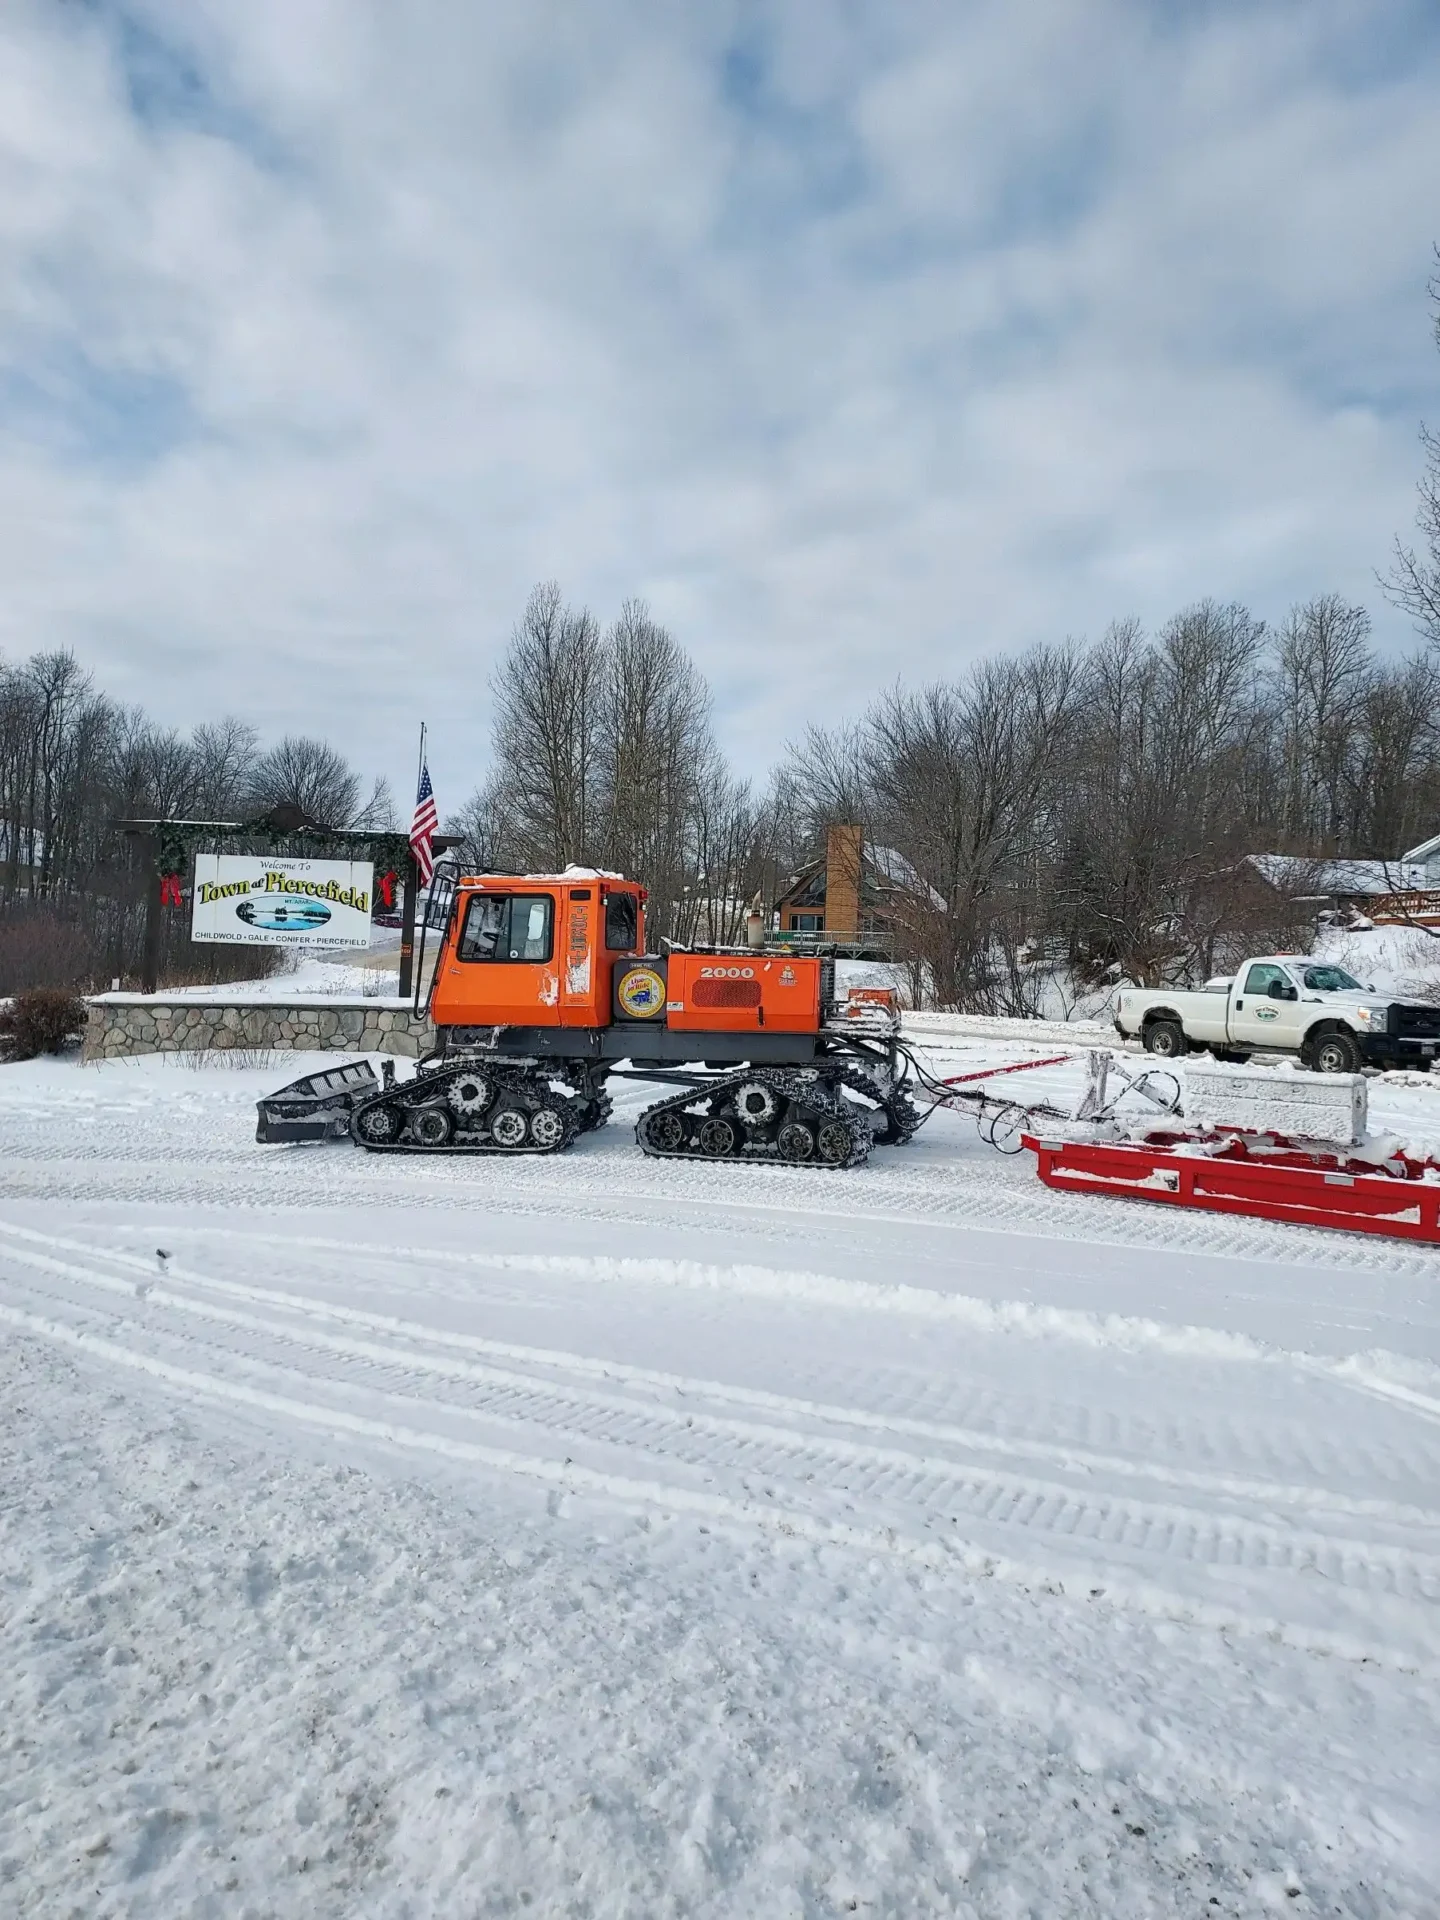 A snow plow truck is parked in the snow.